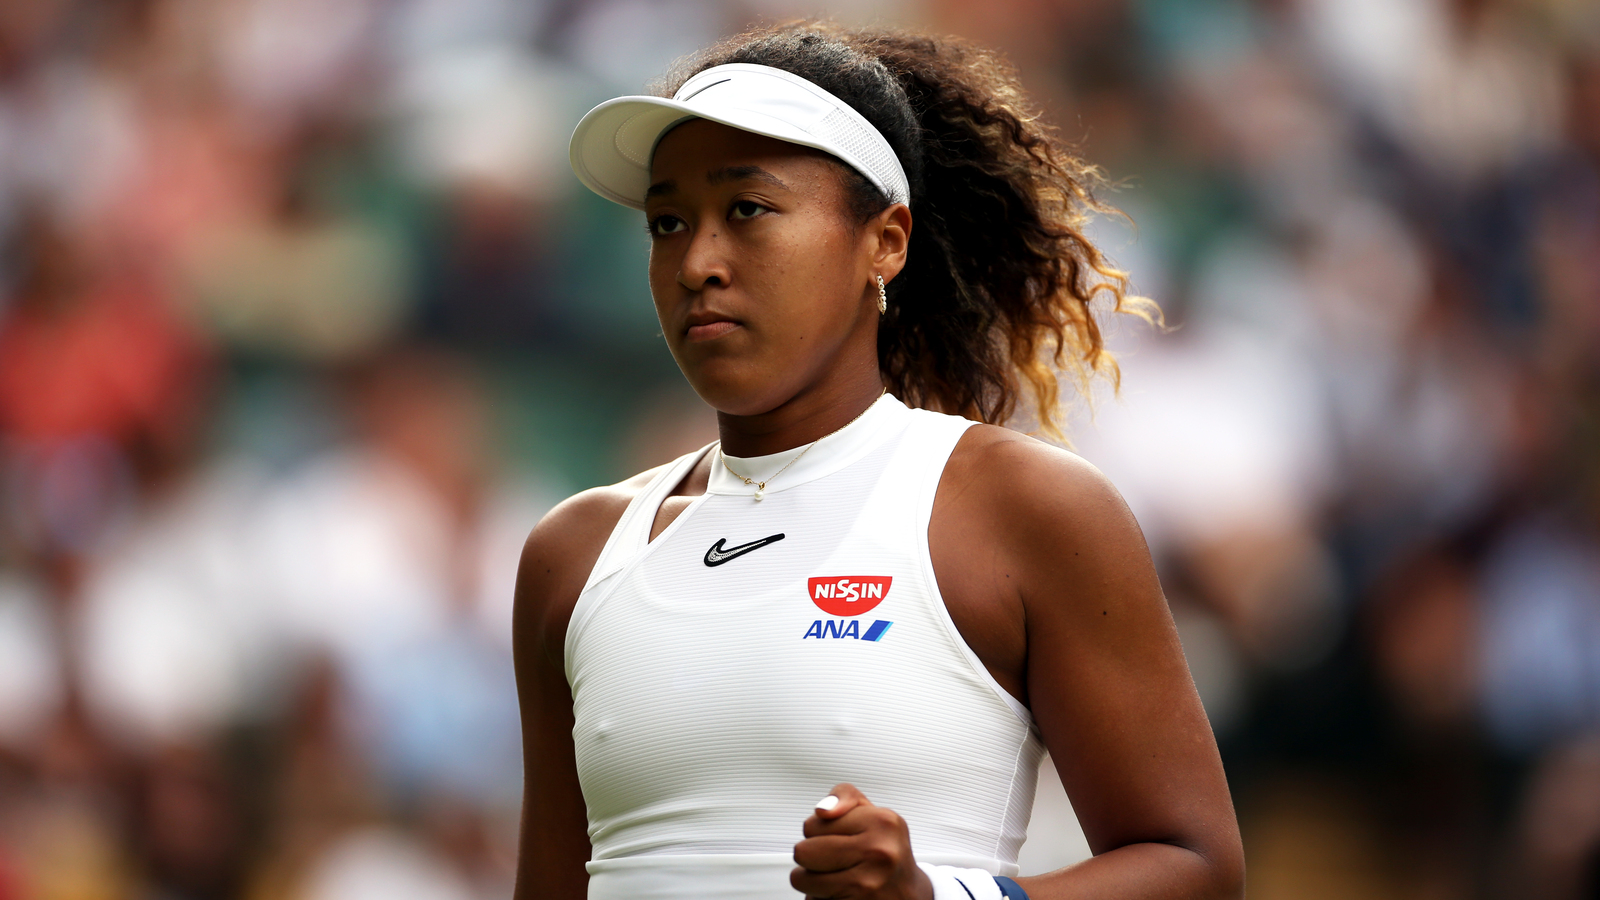 Osaka Backed To Make Top 10 Return By Serena Williams' Former Coach